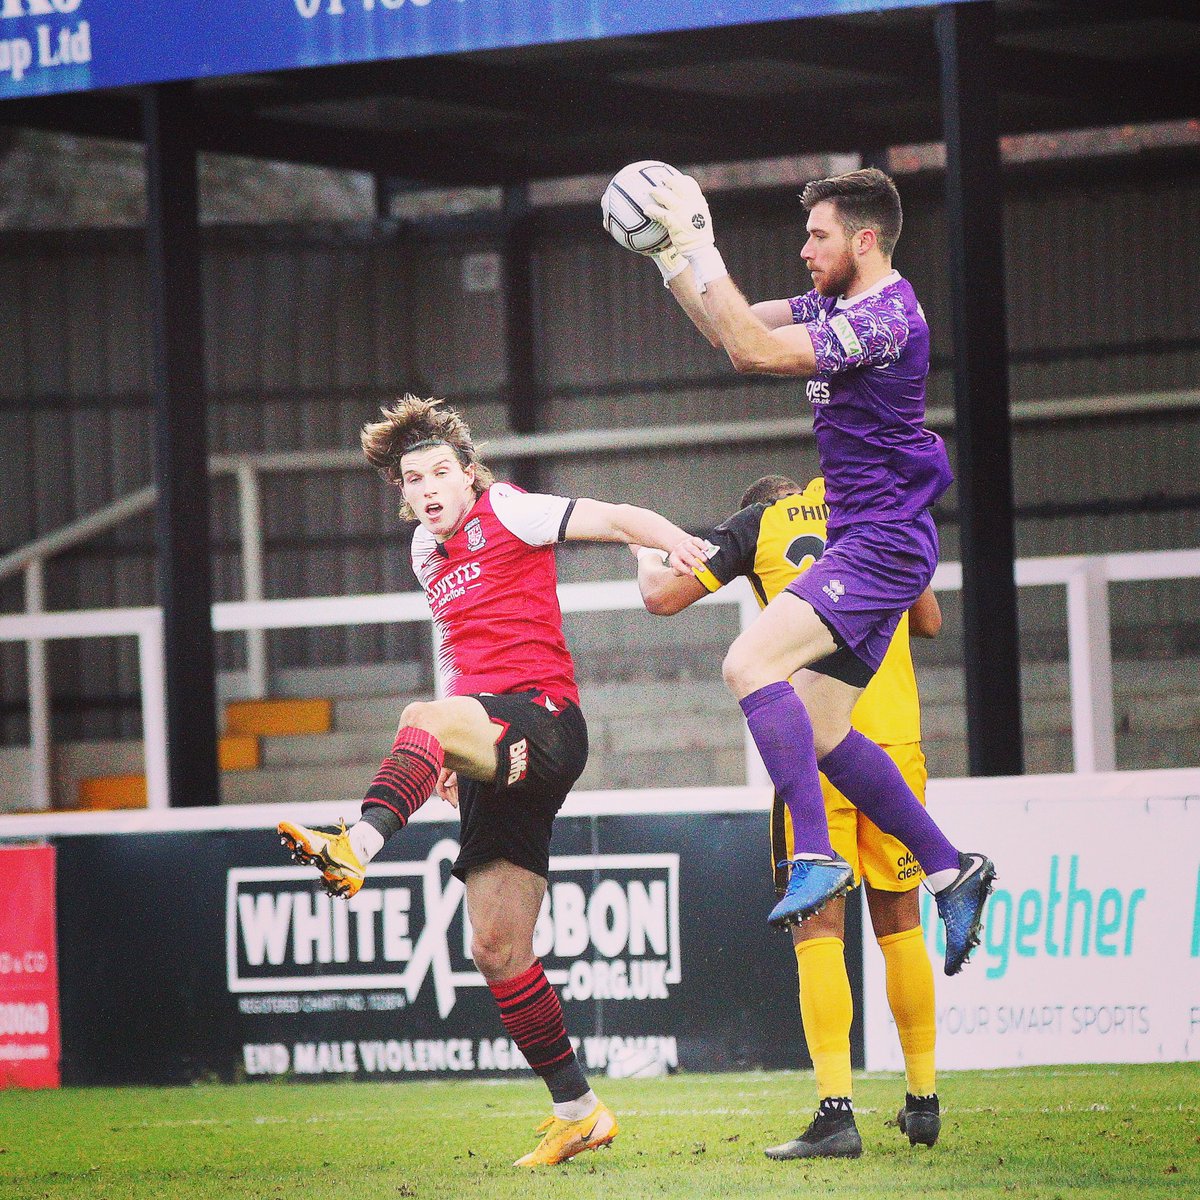 New Year, 3 points and a clean sheet! Just as we like it 🧤. 
.
.
#HNY #2021 #hny2021 #Goalkeeping #goalkeeper #Aldershot #Shots